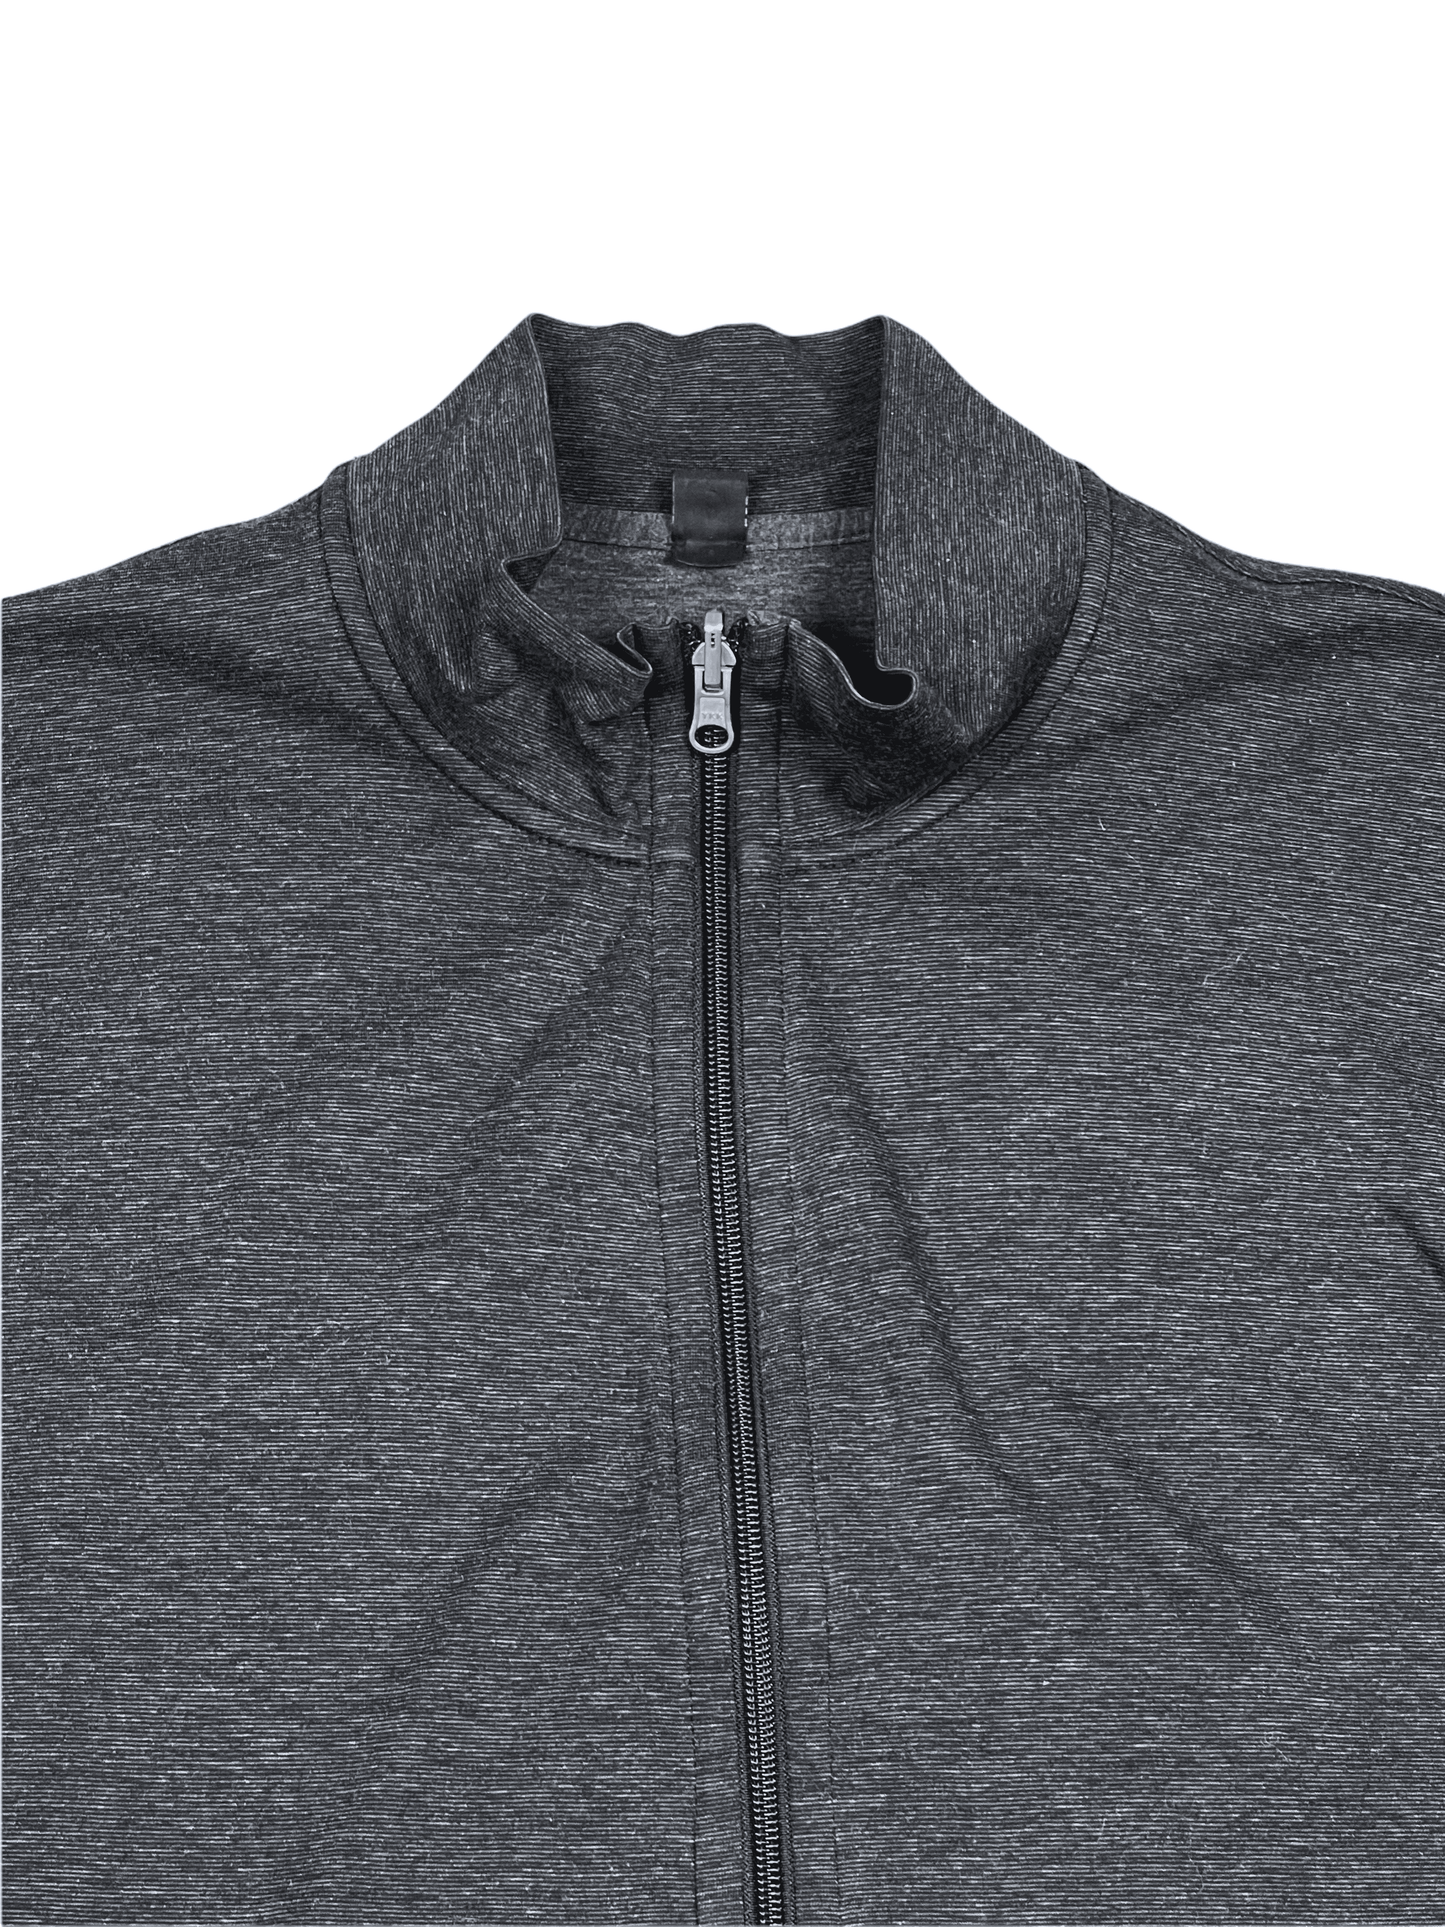 Hugo Boss Charcoal Full Zip Reversible Sweater XL - Genuine Design Luxury Consignment for Men. New & Pre-Owned Clothing, Shoes, & Accessories. Calgary, Canada